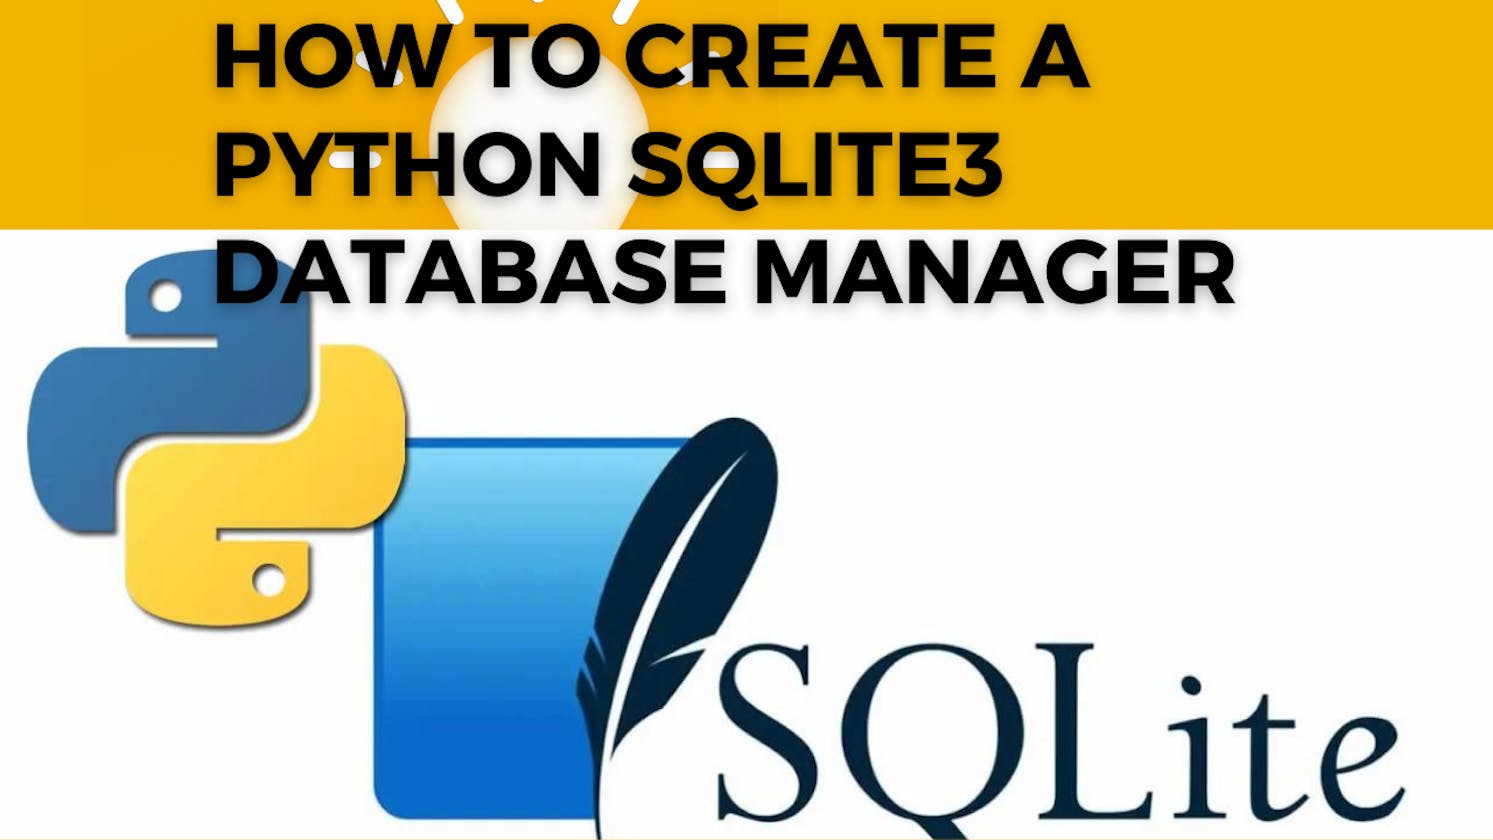 How to create a Python sqlite3 database manager